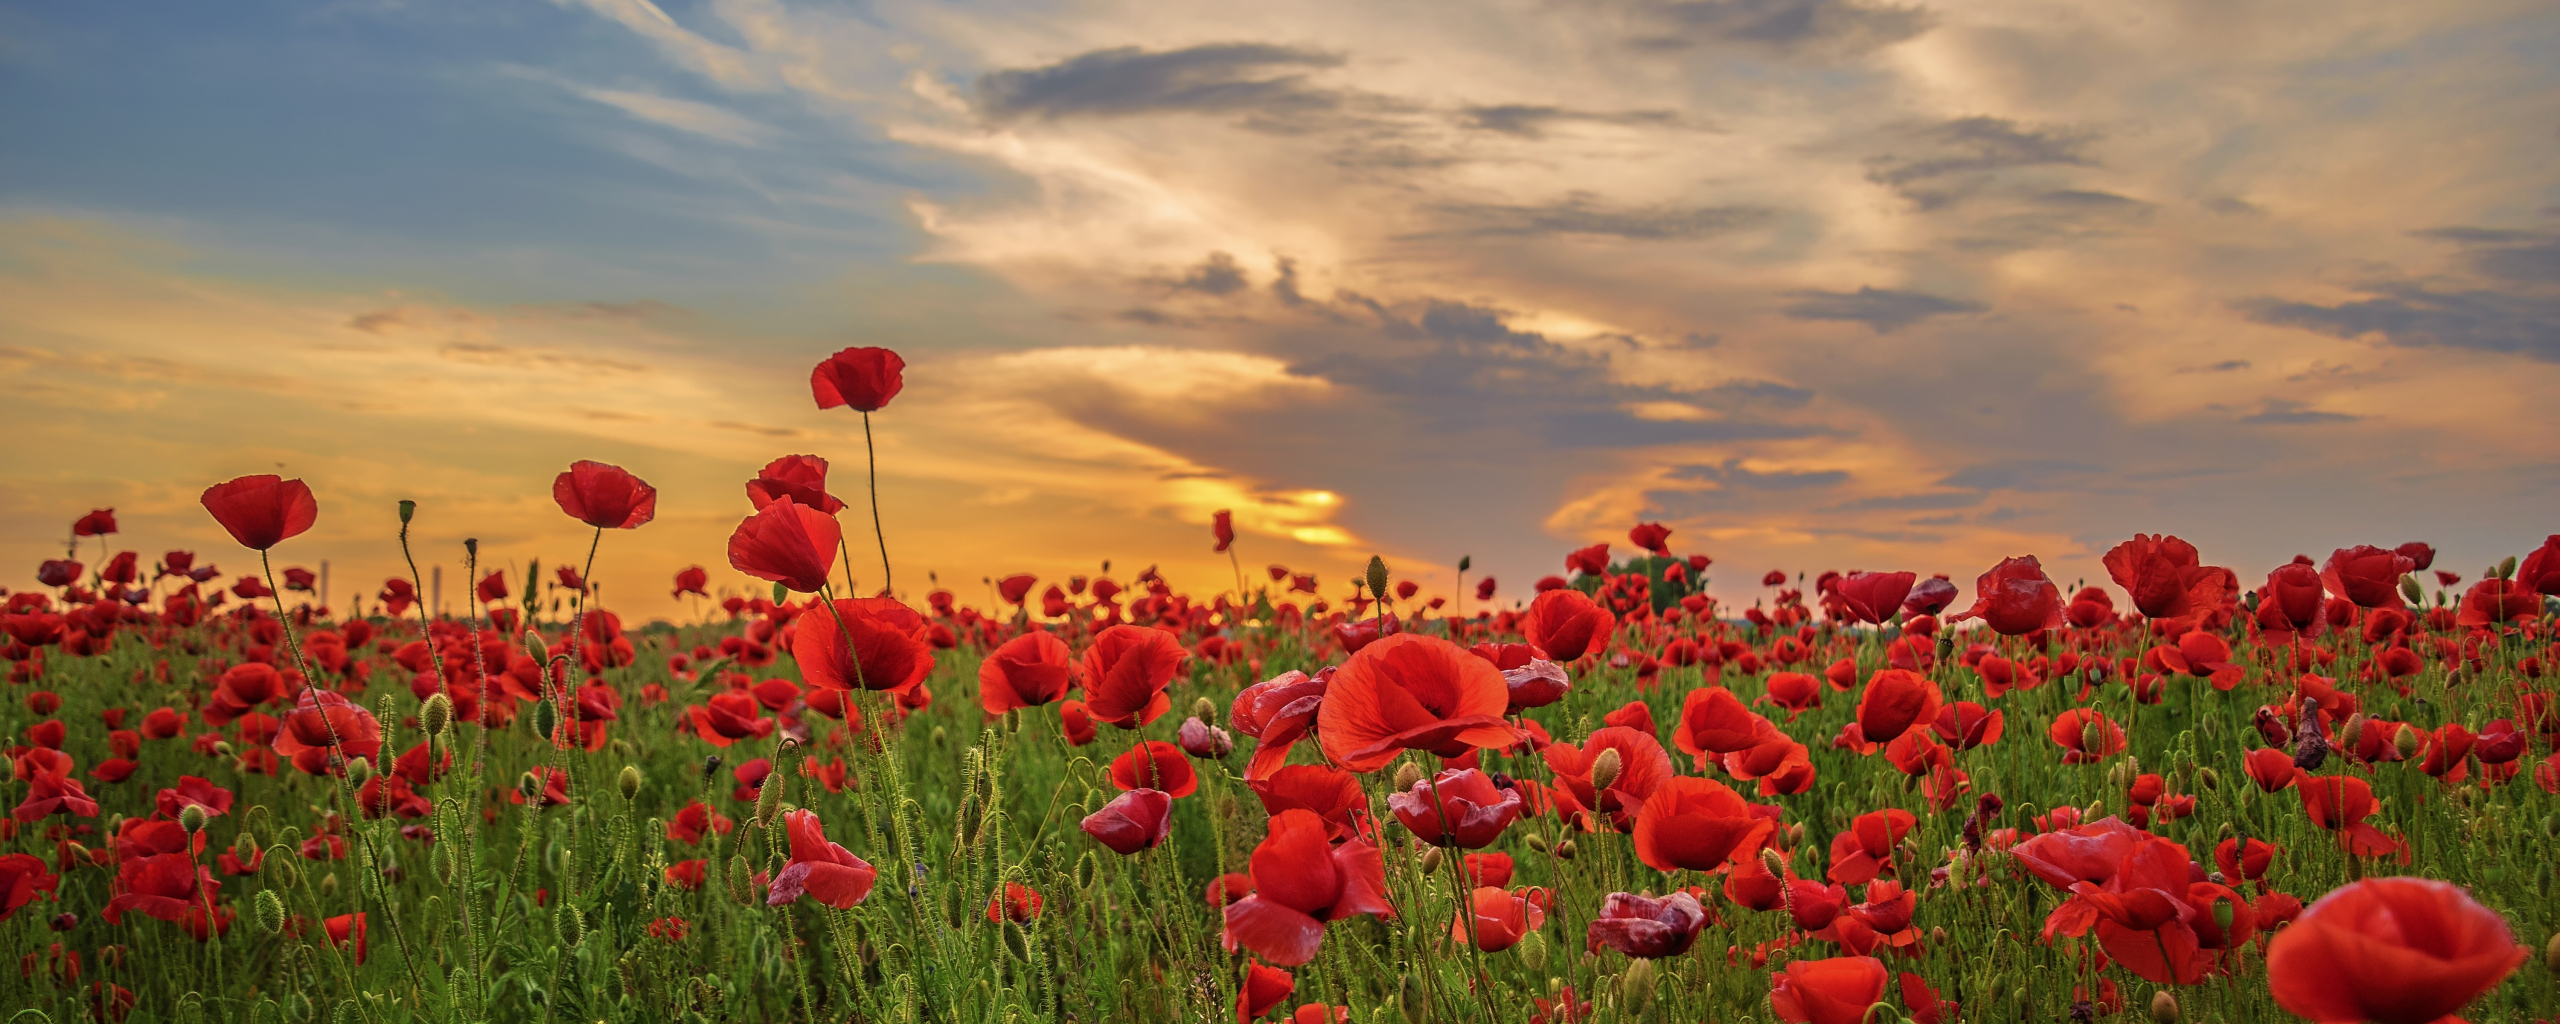 Download wallpaper 2560x1024 sunset, poppy, field, flowers, red, dual ...